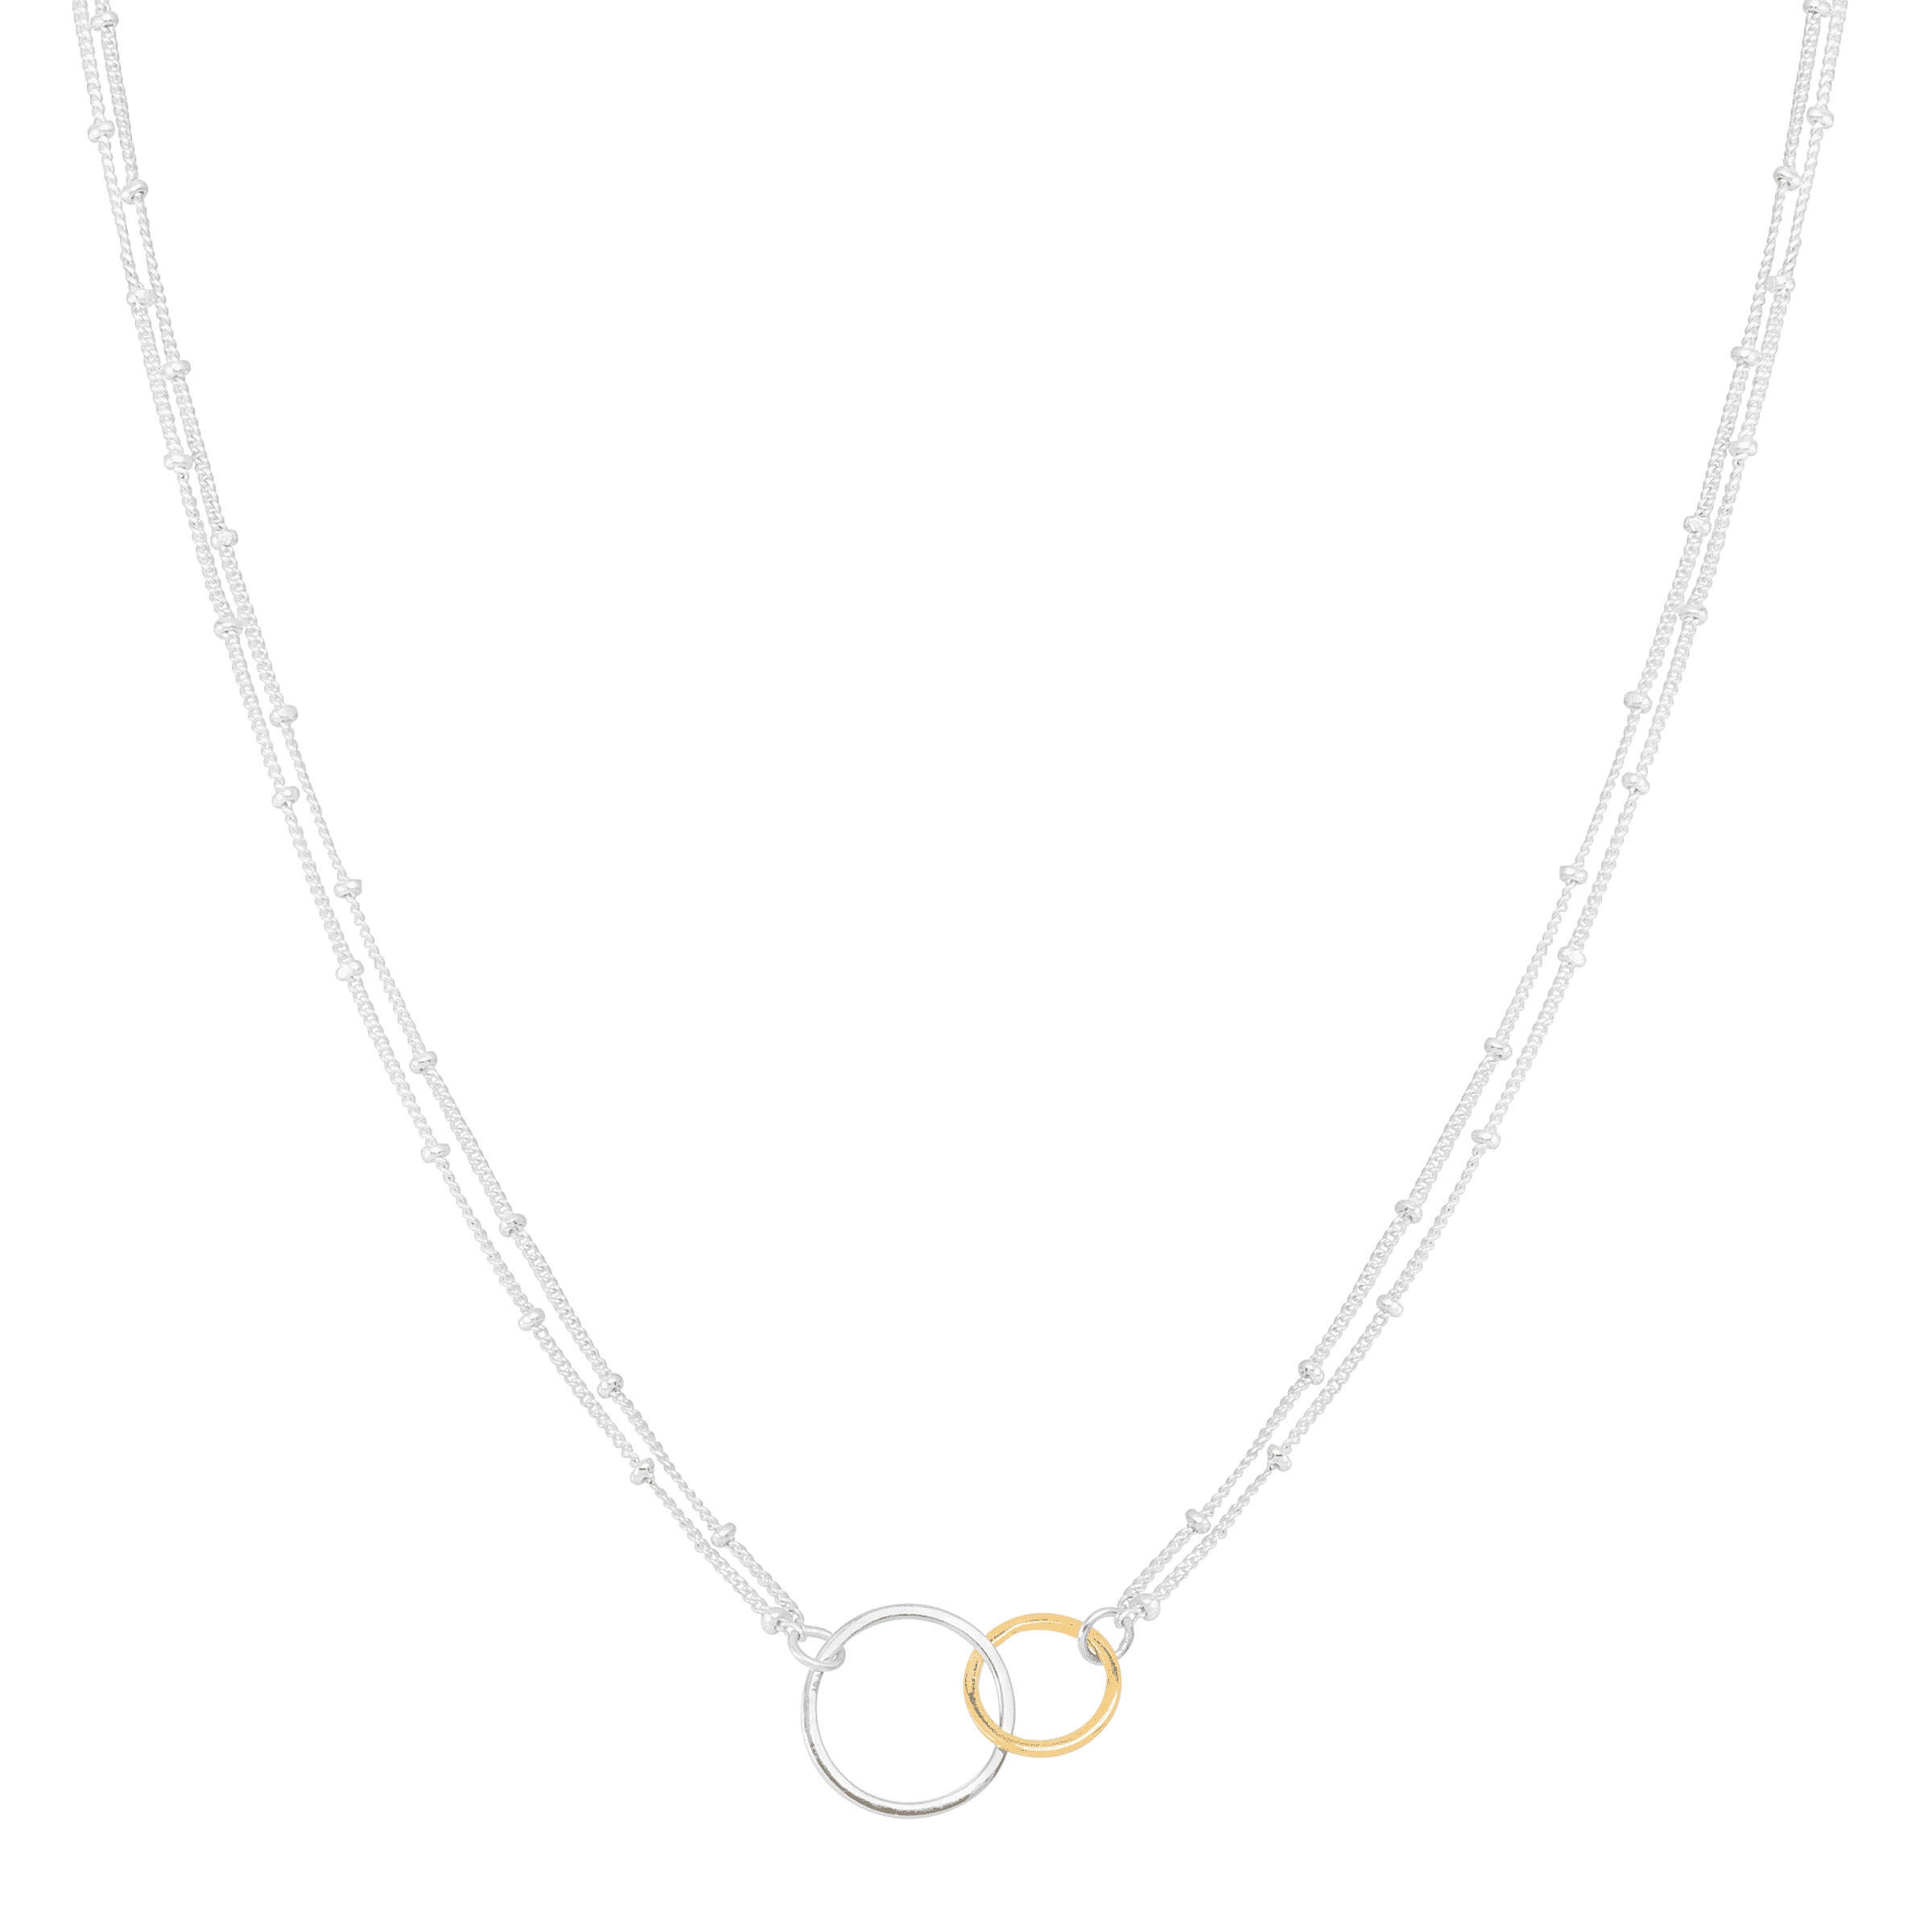 Sterling Silver with Yellow Gold-Plating Double Strand Necklace - Silpada -  .925 Sterling Silver Two-Tone Pagosa Minimalist Circle Link Necklace|